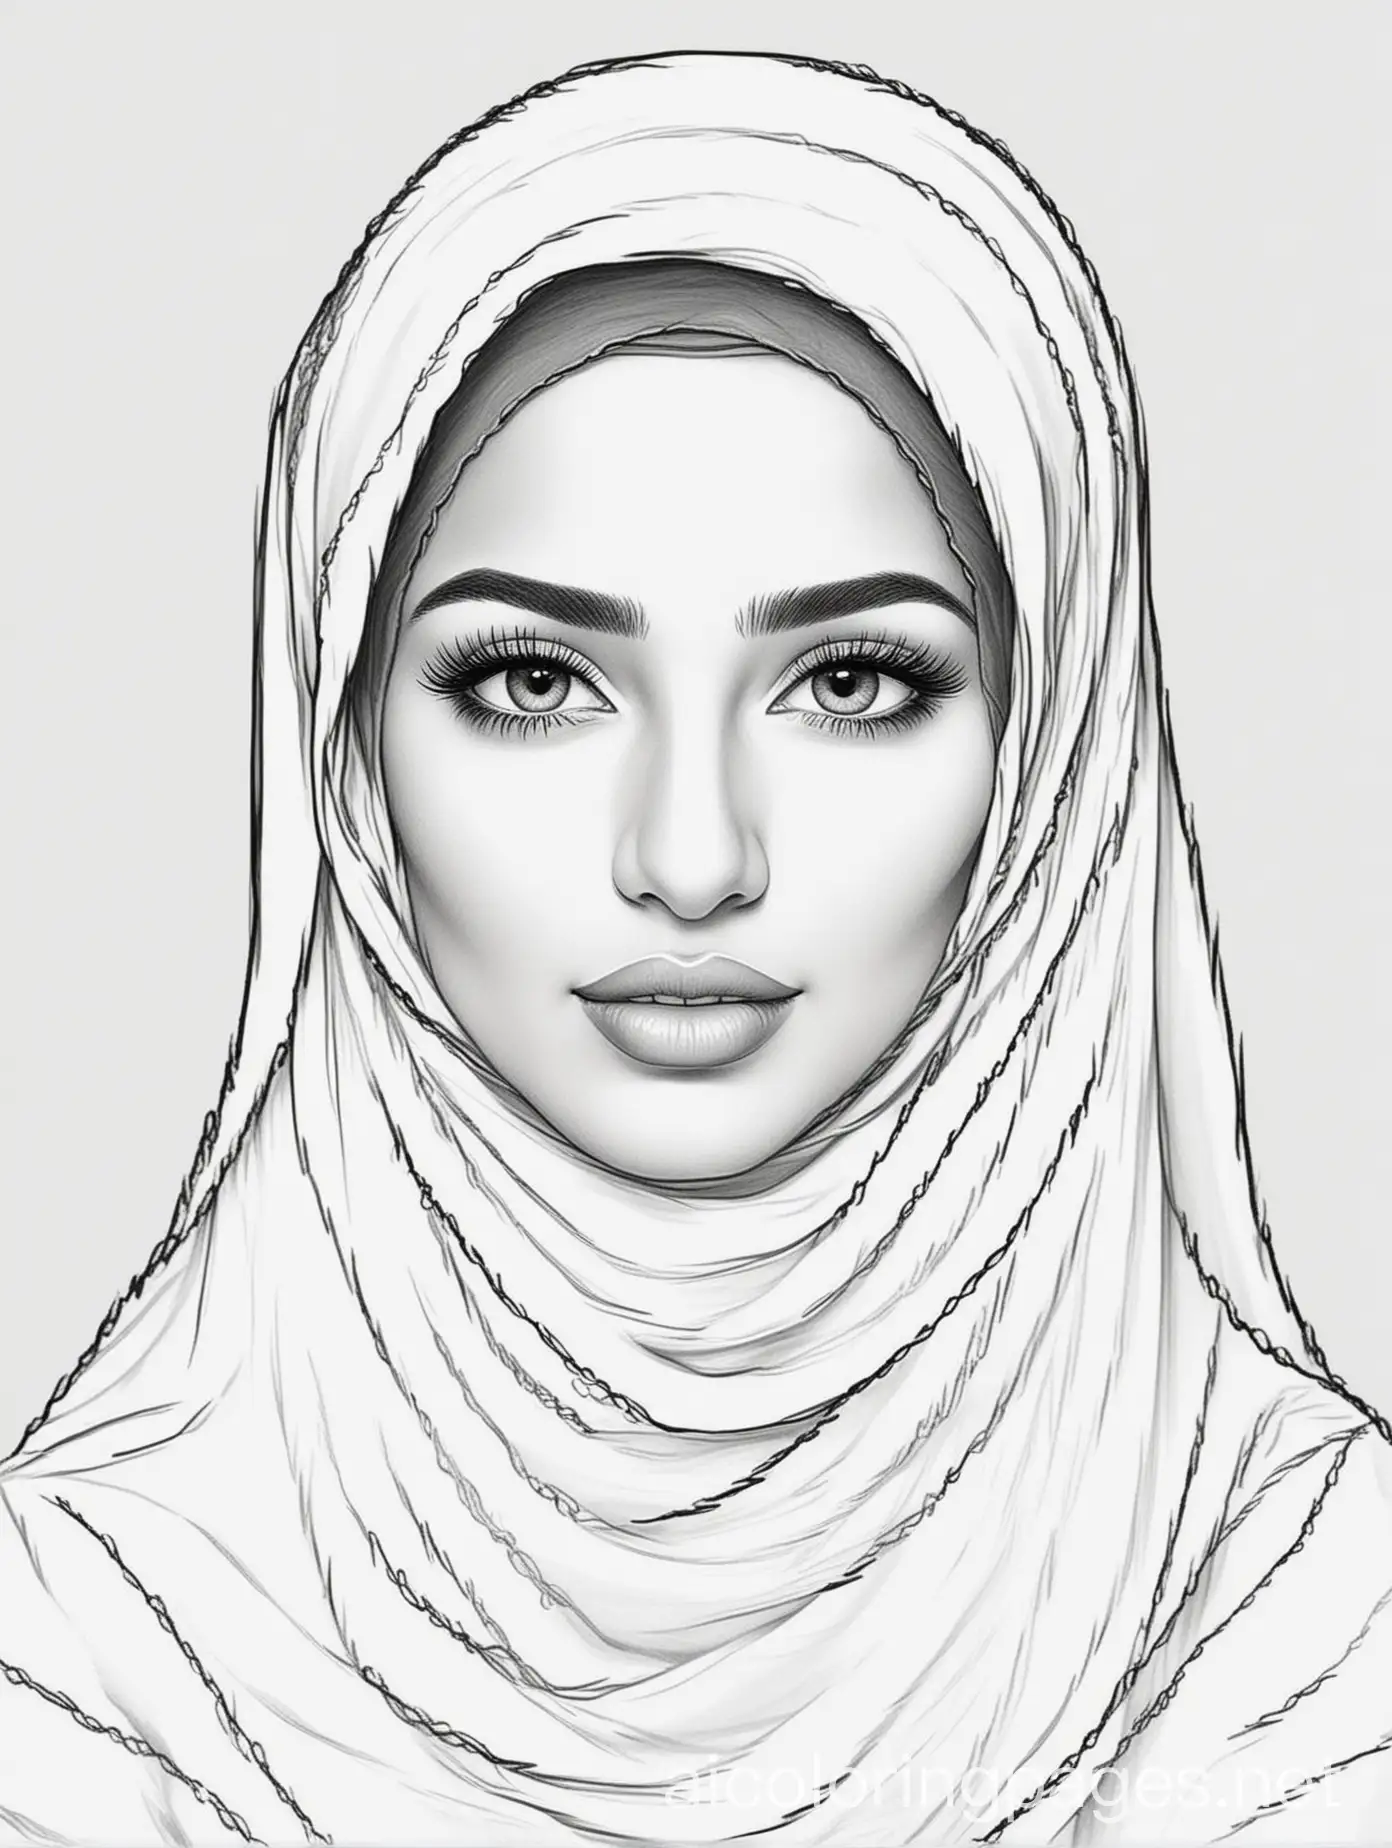 Arab-Muslim-Woman-Veiled-Coloring-Page-Simple-Black-and-White-Line-Art-for-Easy-Coloring